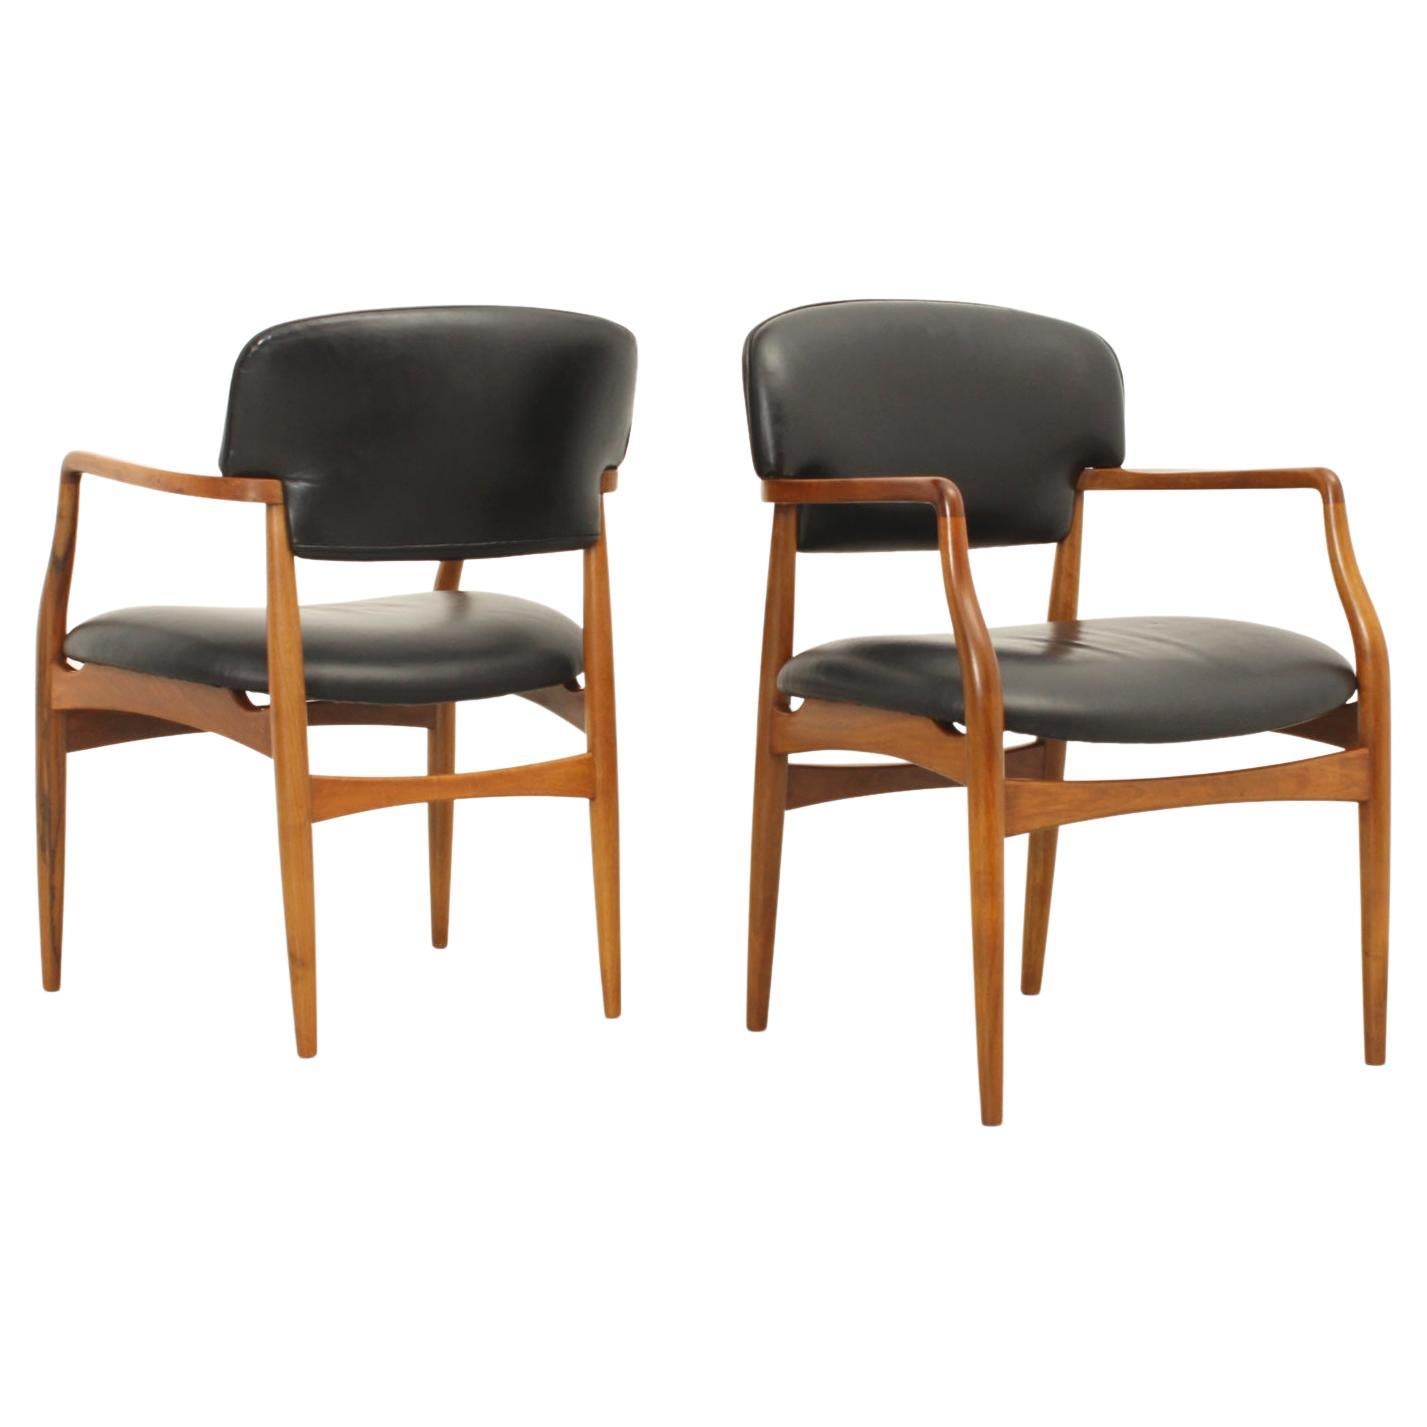 Pair of Armchairs Attributed to Paco Muñoz for Darro, Spain, 1959